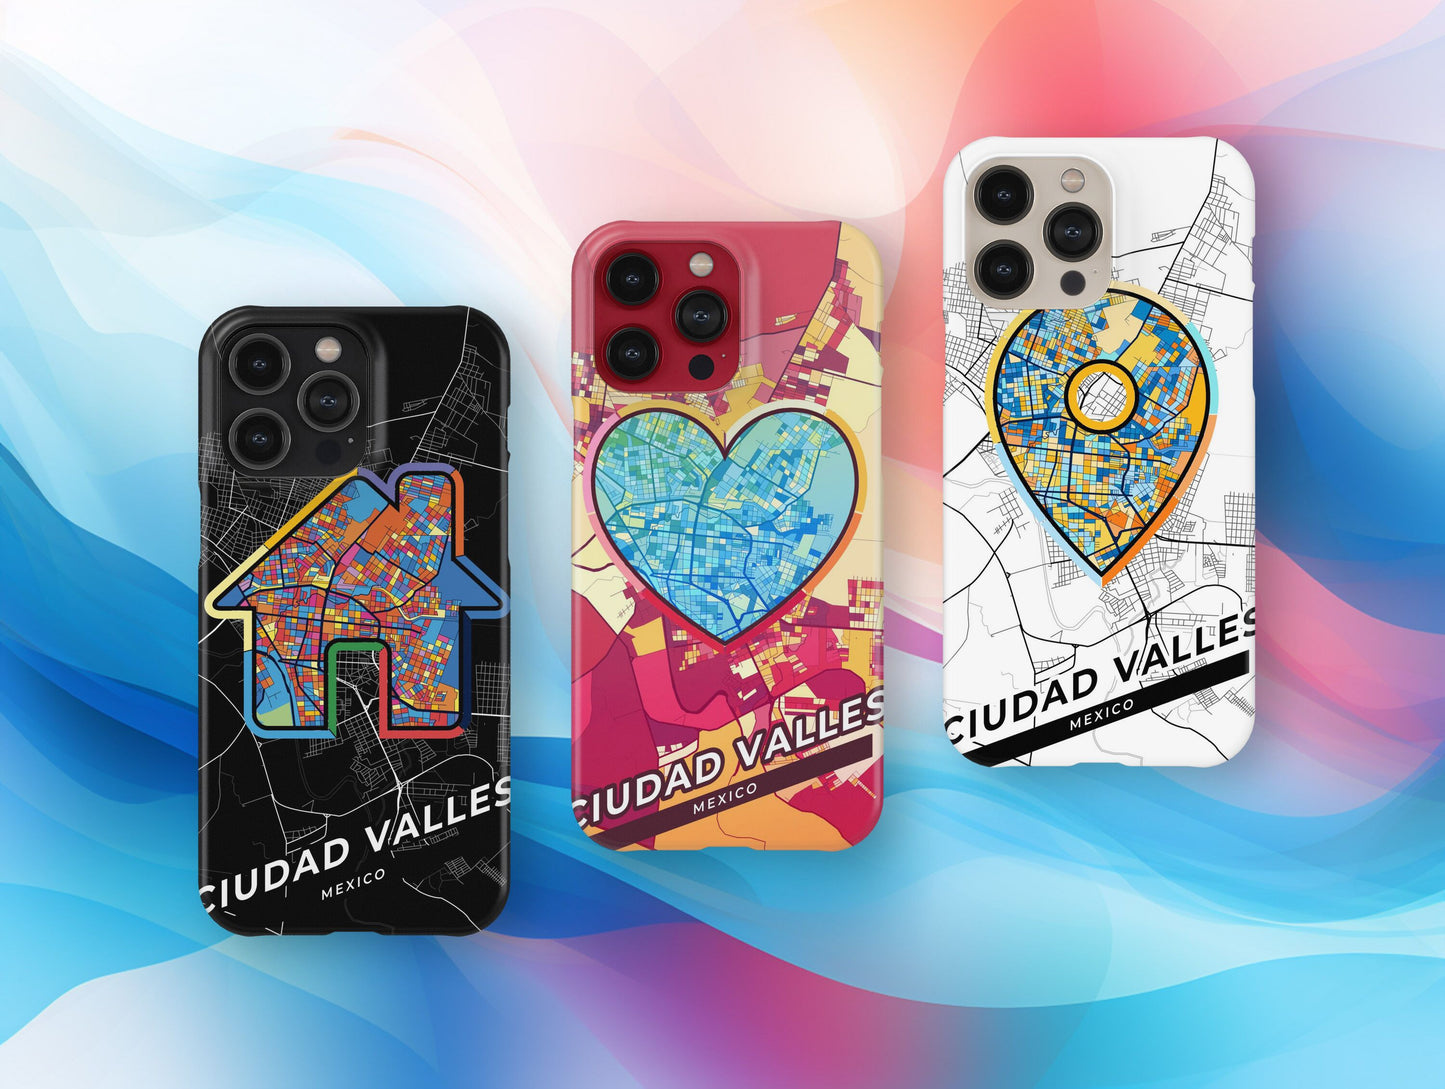 Ciudad Valles Mexico slim phone case with colorful icon. Birthday, wedding or housewarming gift. Couple match cases.